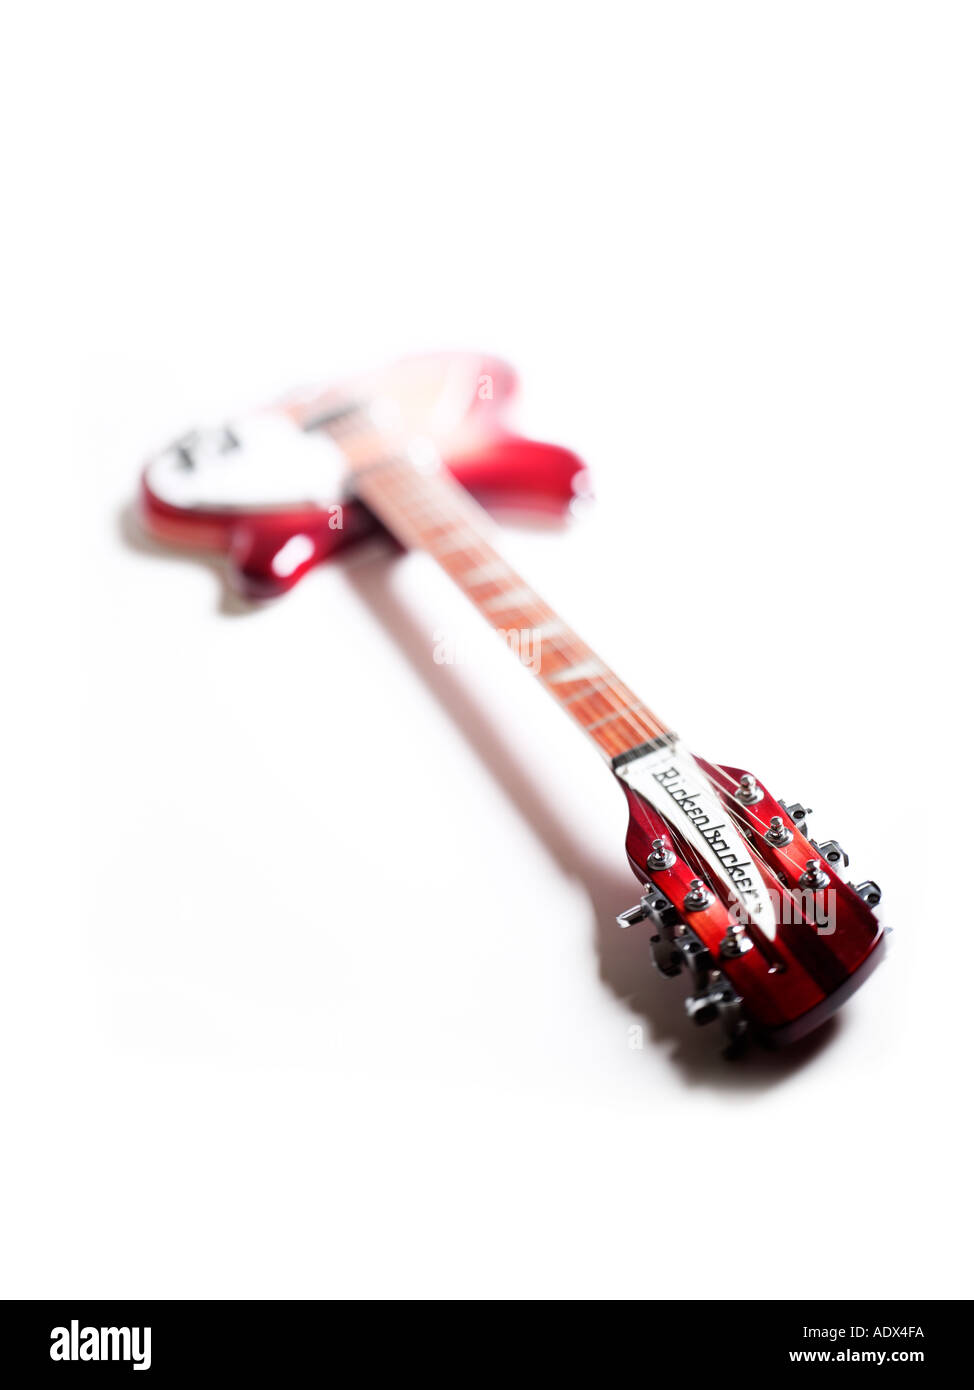 A red Rickenbacker guitar on a white background Stock Photo